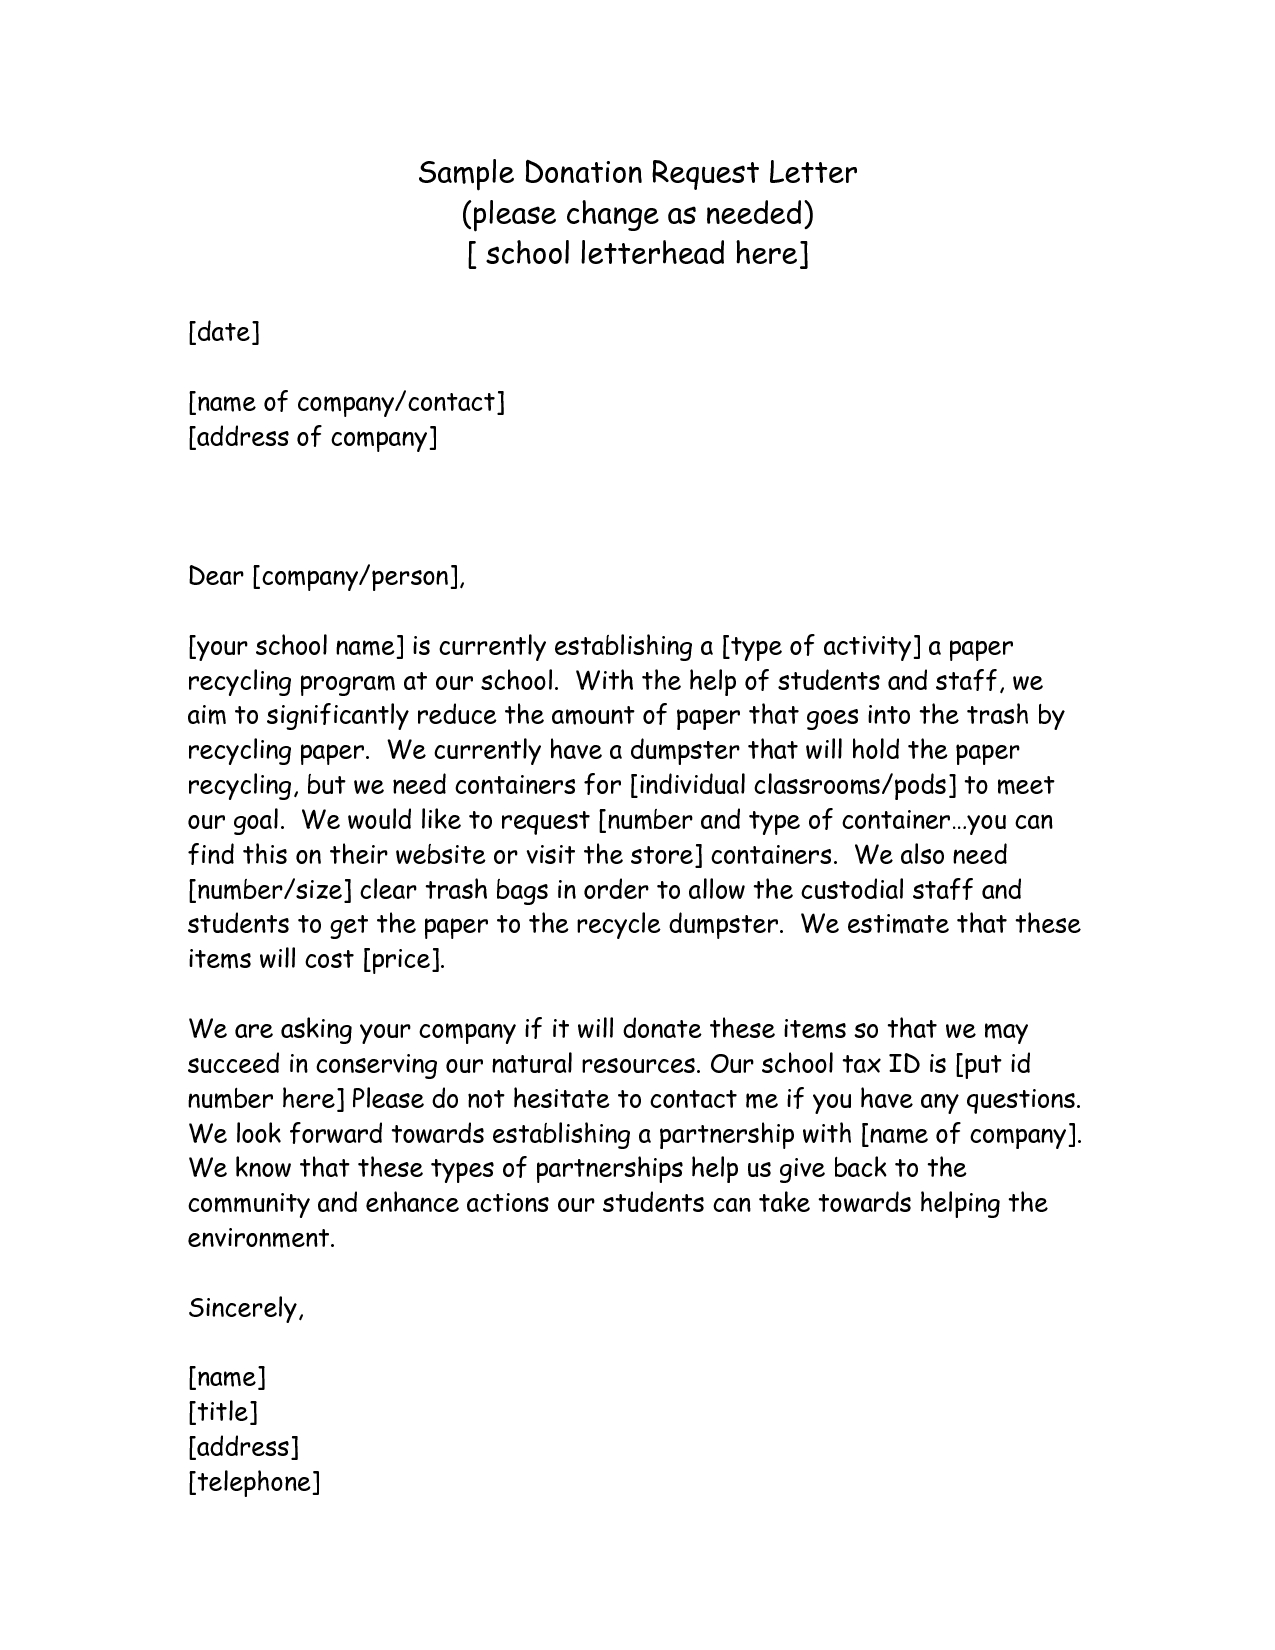 Charity Sponsorship Letter Template - Examples for Donation Letters